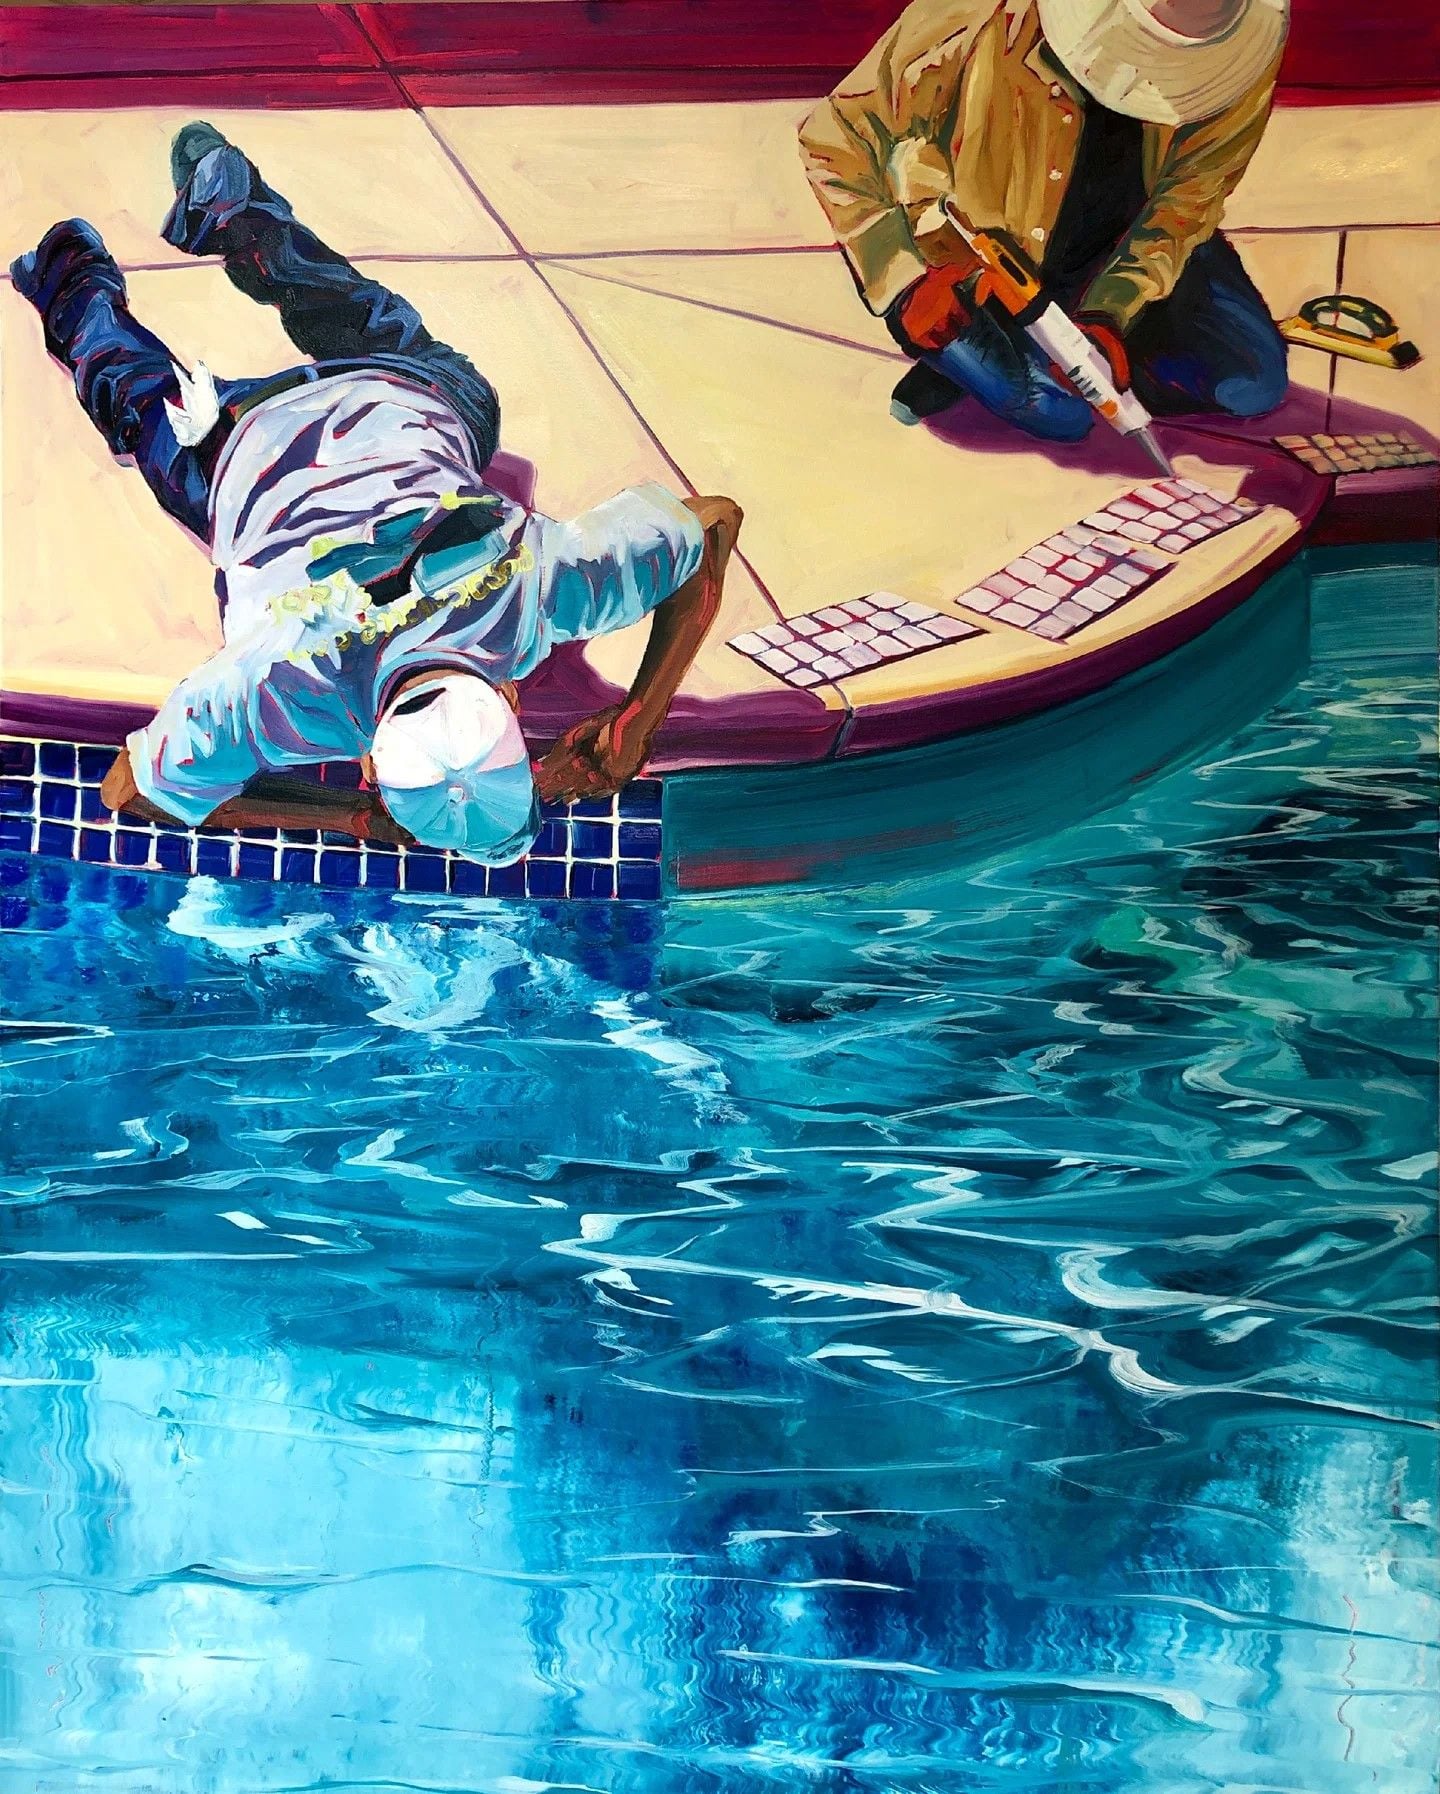 Painting of workers installing tiles in a luxury swimming pool, as featured in Rex Southwick's ongoing 